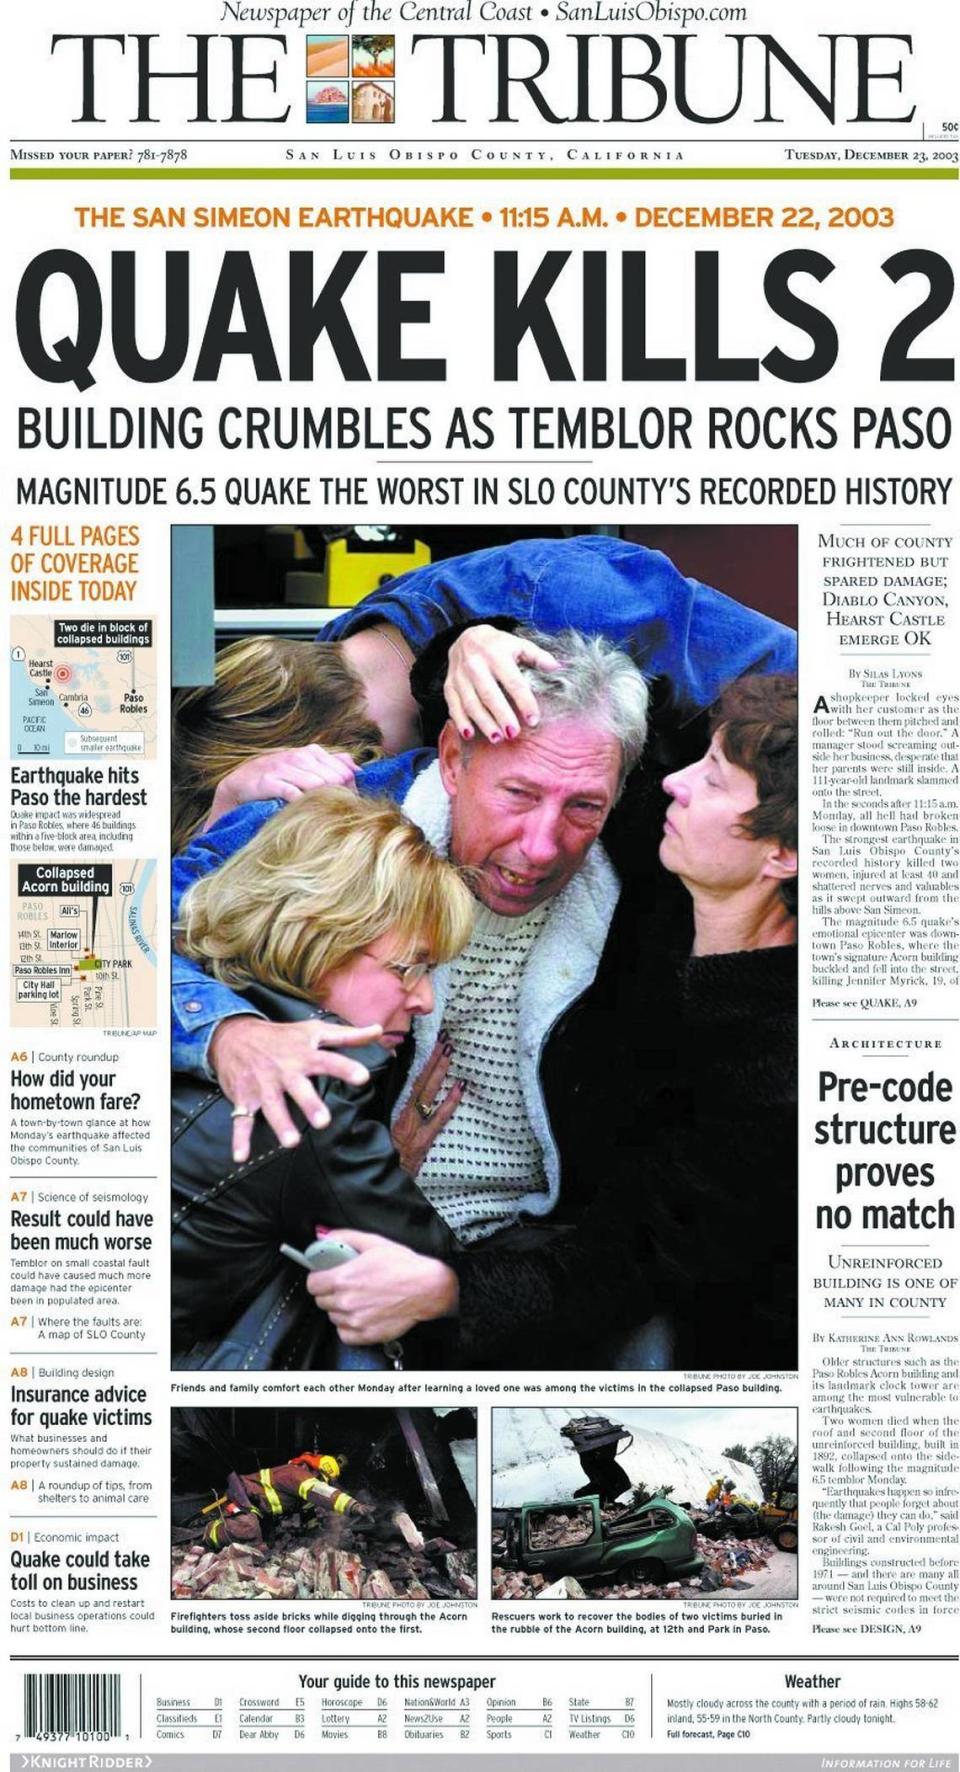 The San Simeon Earthquake struck Dec. 22, 2003 and killed 2 in Paso Robles when an unreinforced masonry building fell. Front page of The Tribune the next morning. Local governments accelerated retrofitting as follow up stories revealed a number of unreinforced buildings in the county.